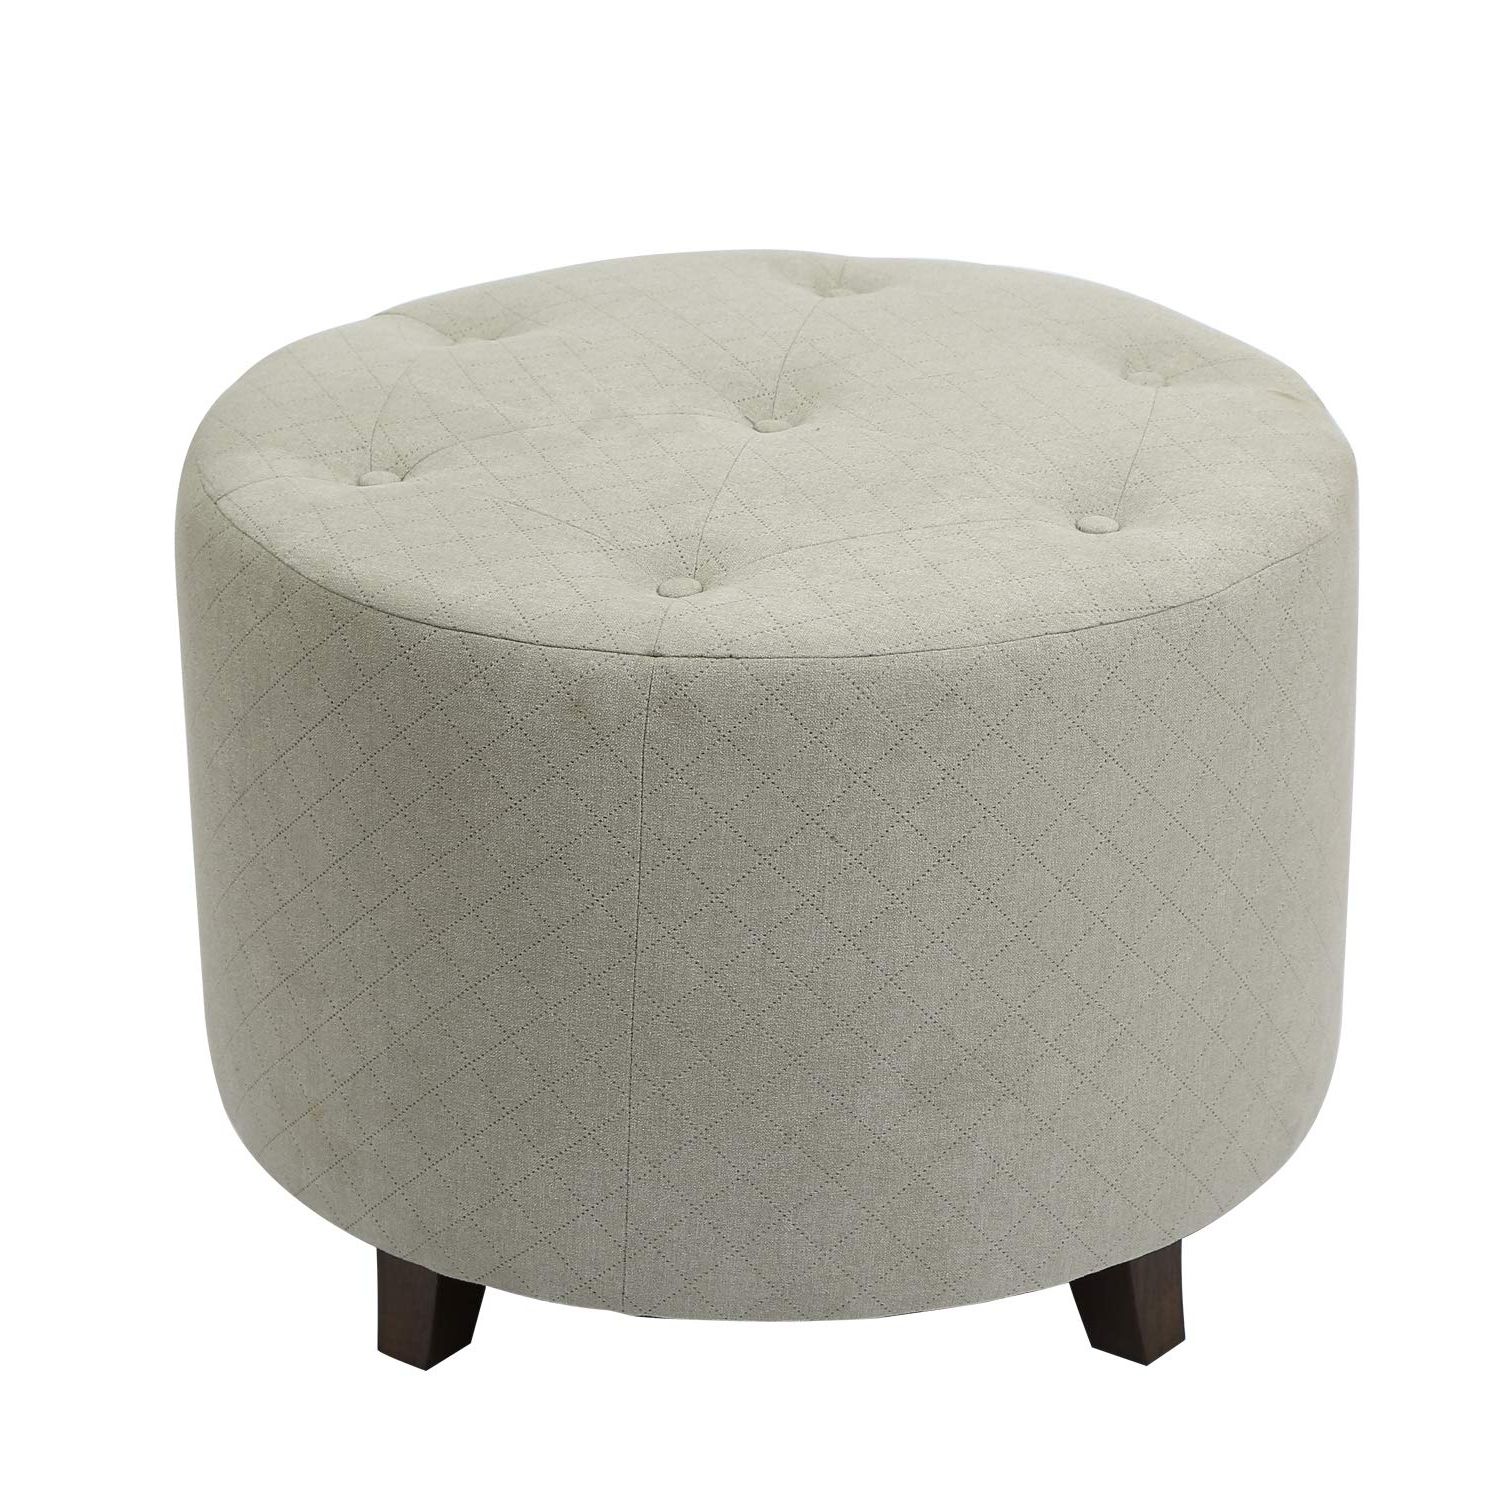 Best And Newest Round Cream Tasseled Ottomans With Regard To Adeco Ft0273 1 Round, Fabric Foot Rest And Seat, Modern Button Tufted (View 2 of 10)